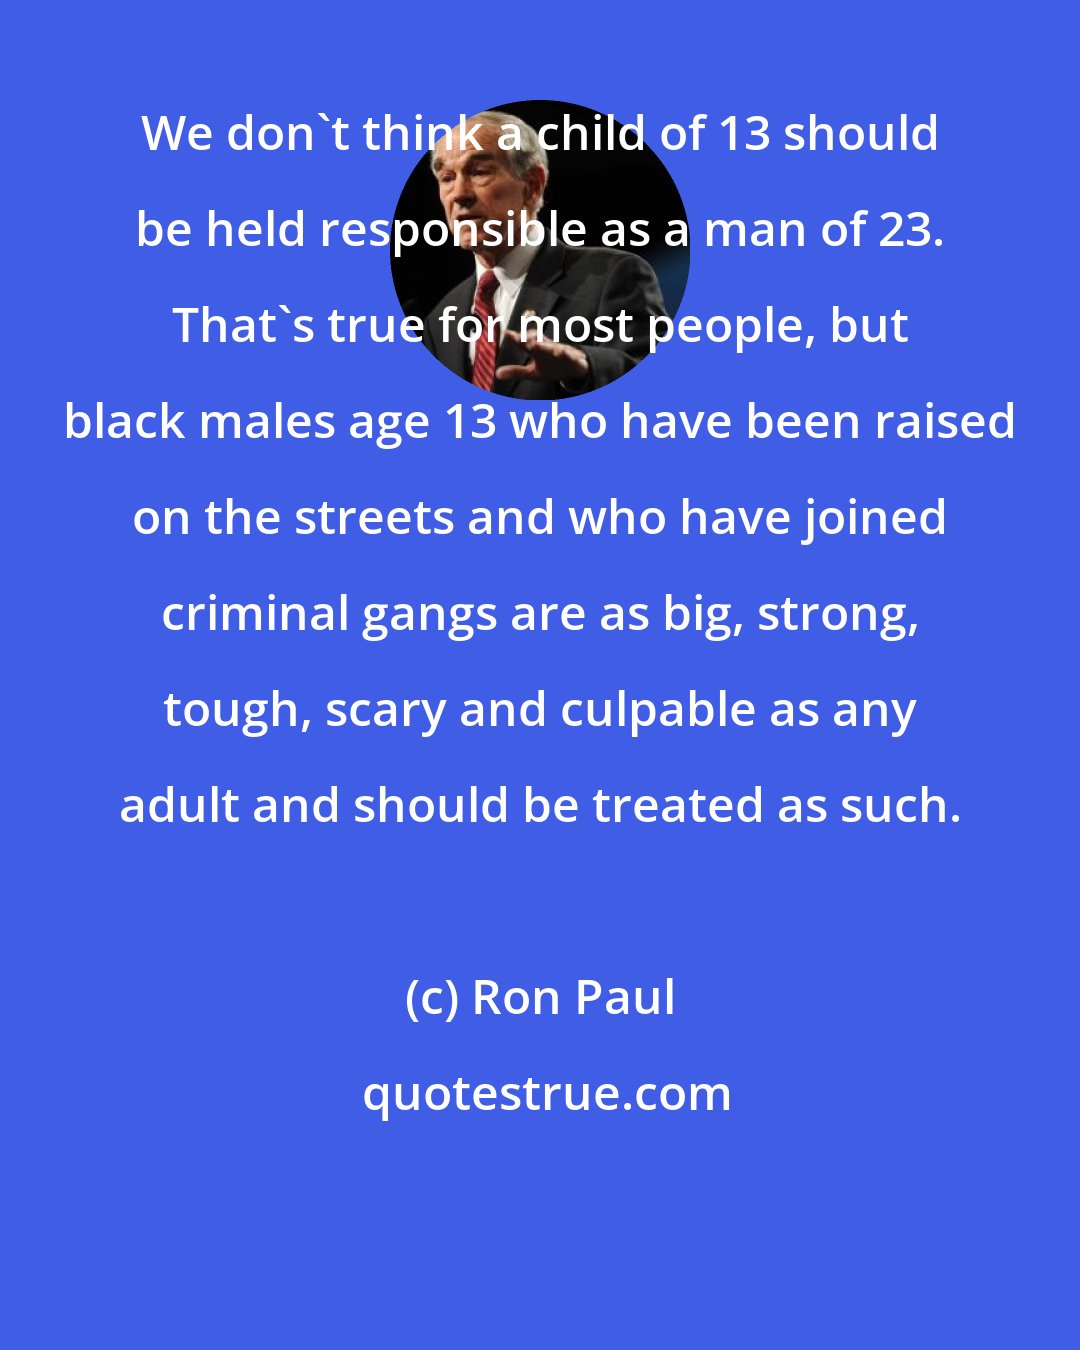 Ron Paul: We don't think a child of 13 should be held responsible as a man of 23. That's true for most people, but black males age 13 who have been raised on the streets and who have joined criminal gangs are as big, strong, tough, scary and culpable as any adult and should be treated as such.